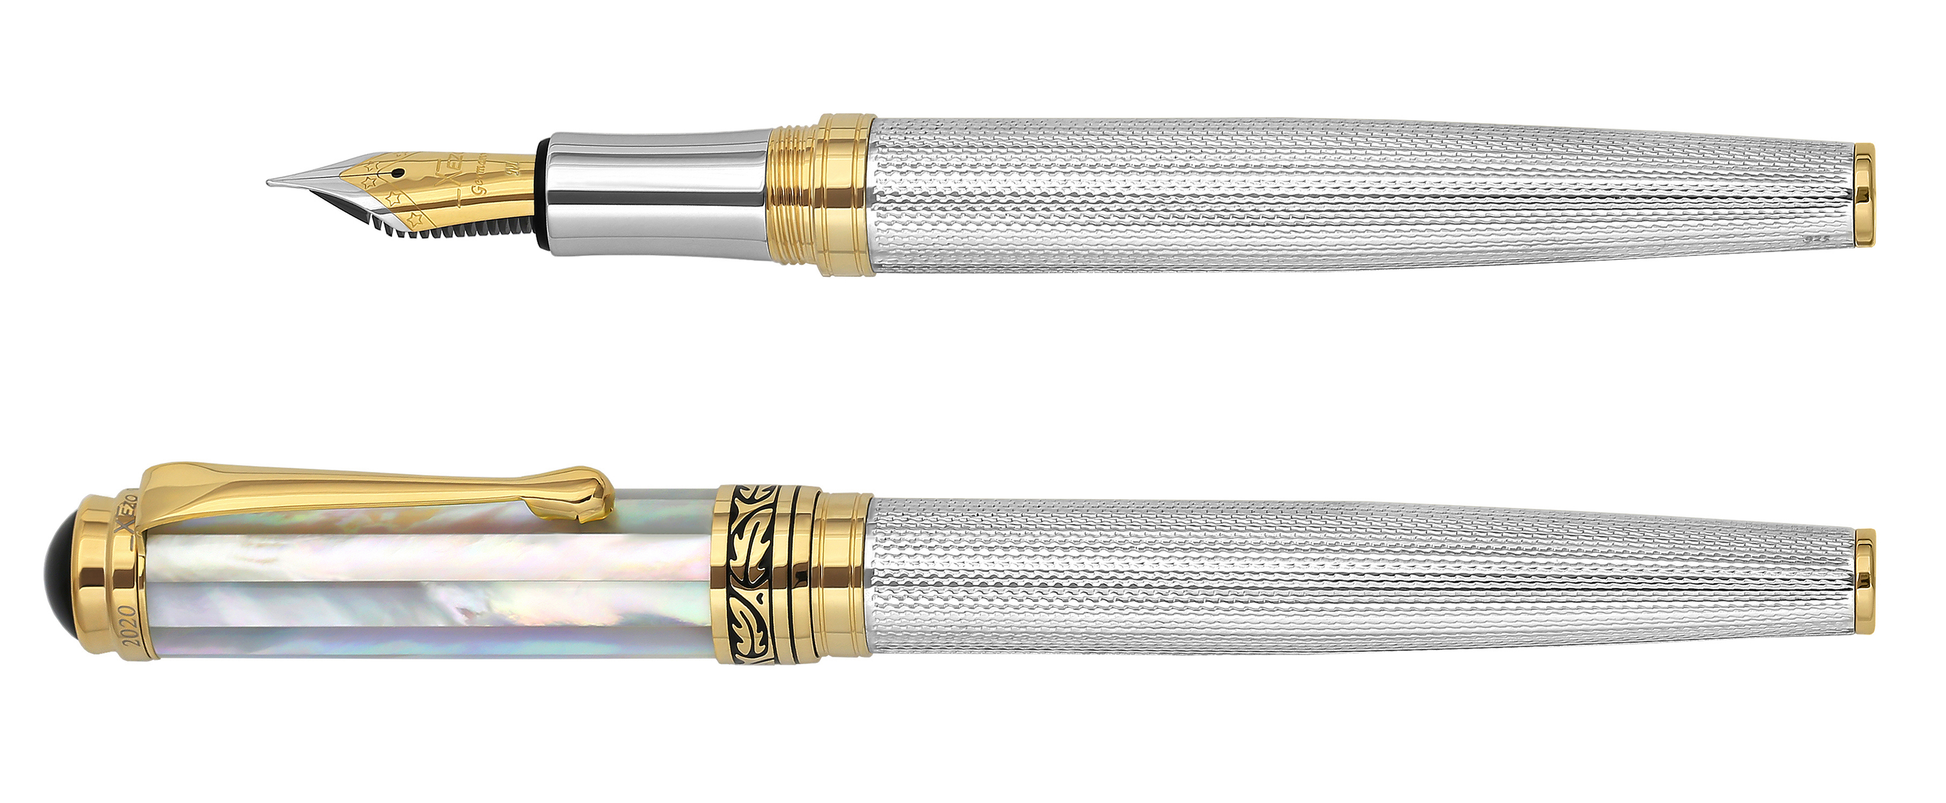 Xezo - Vertical view of two Maestro 925 White MOP FM Fountain pens; the one on the left is capped, and the one on the right is uncapped